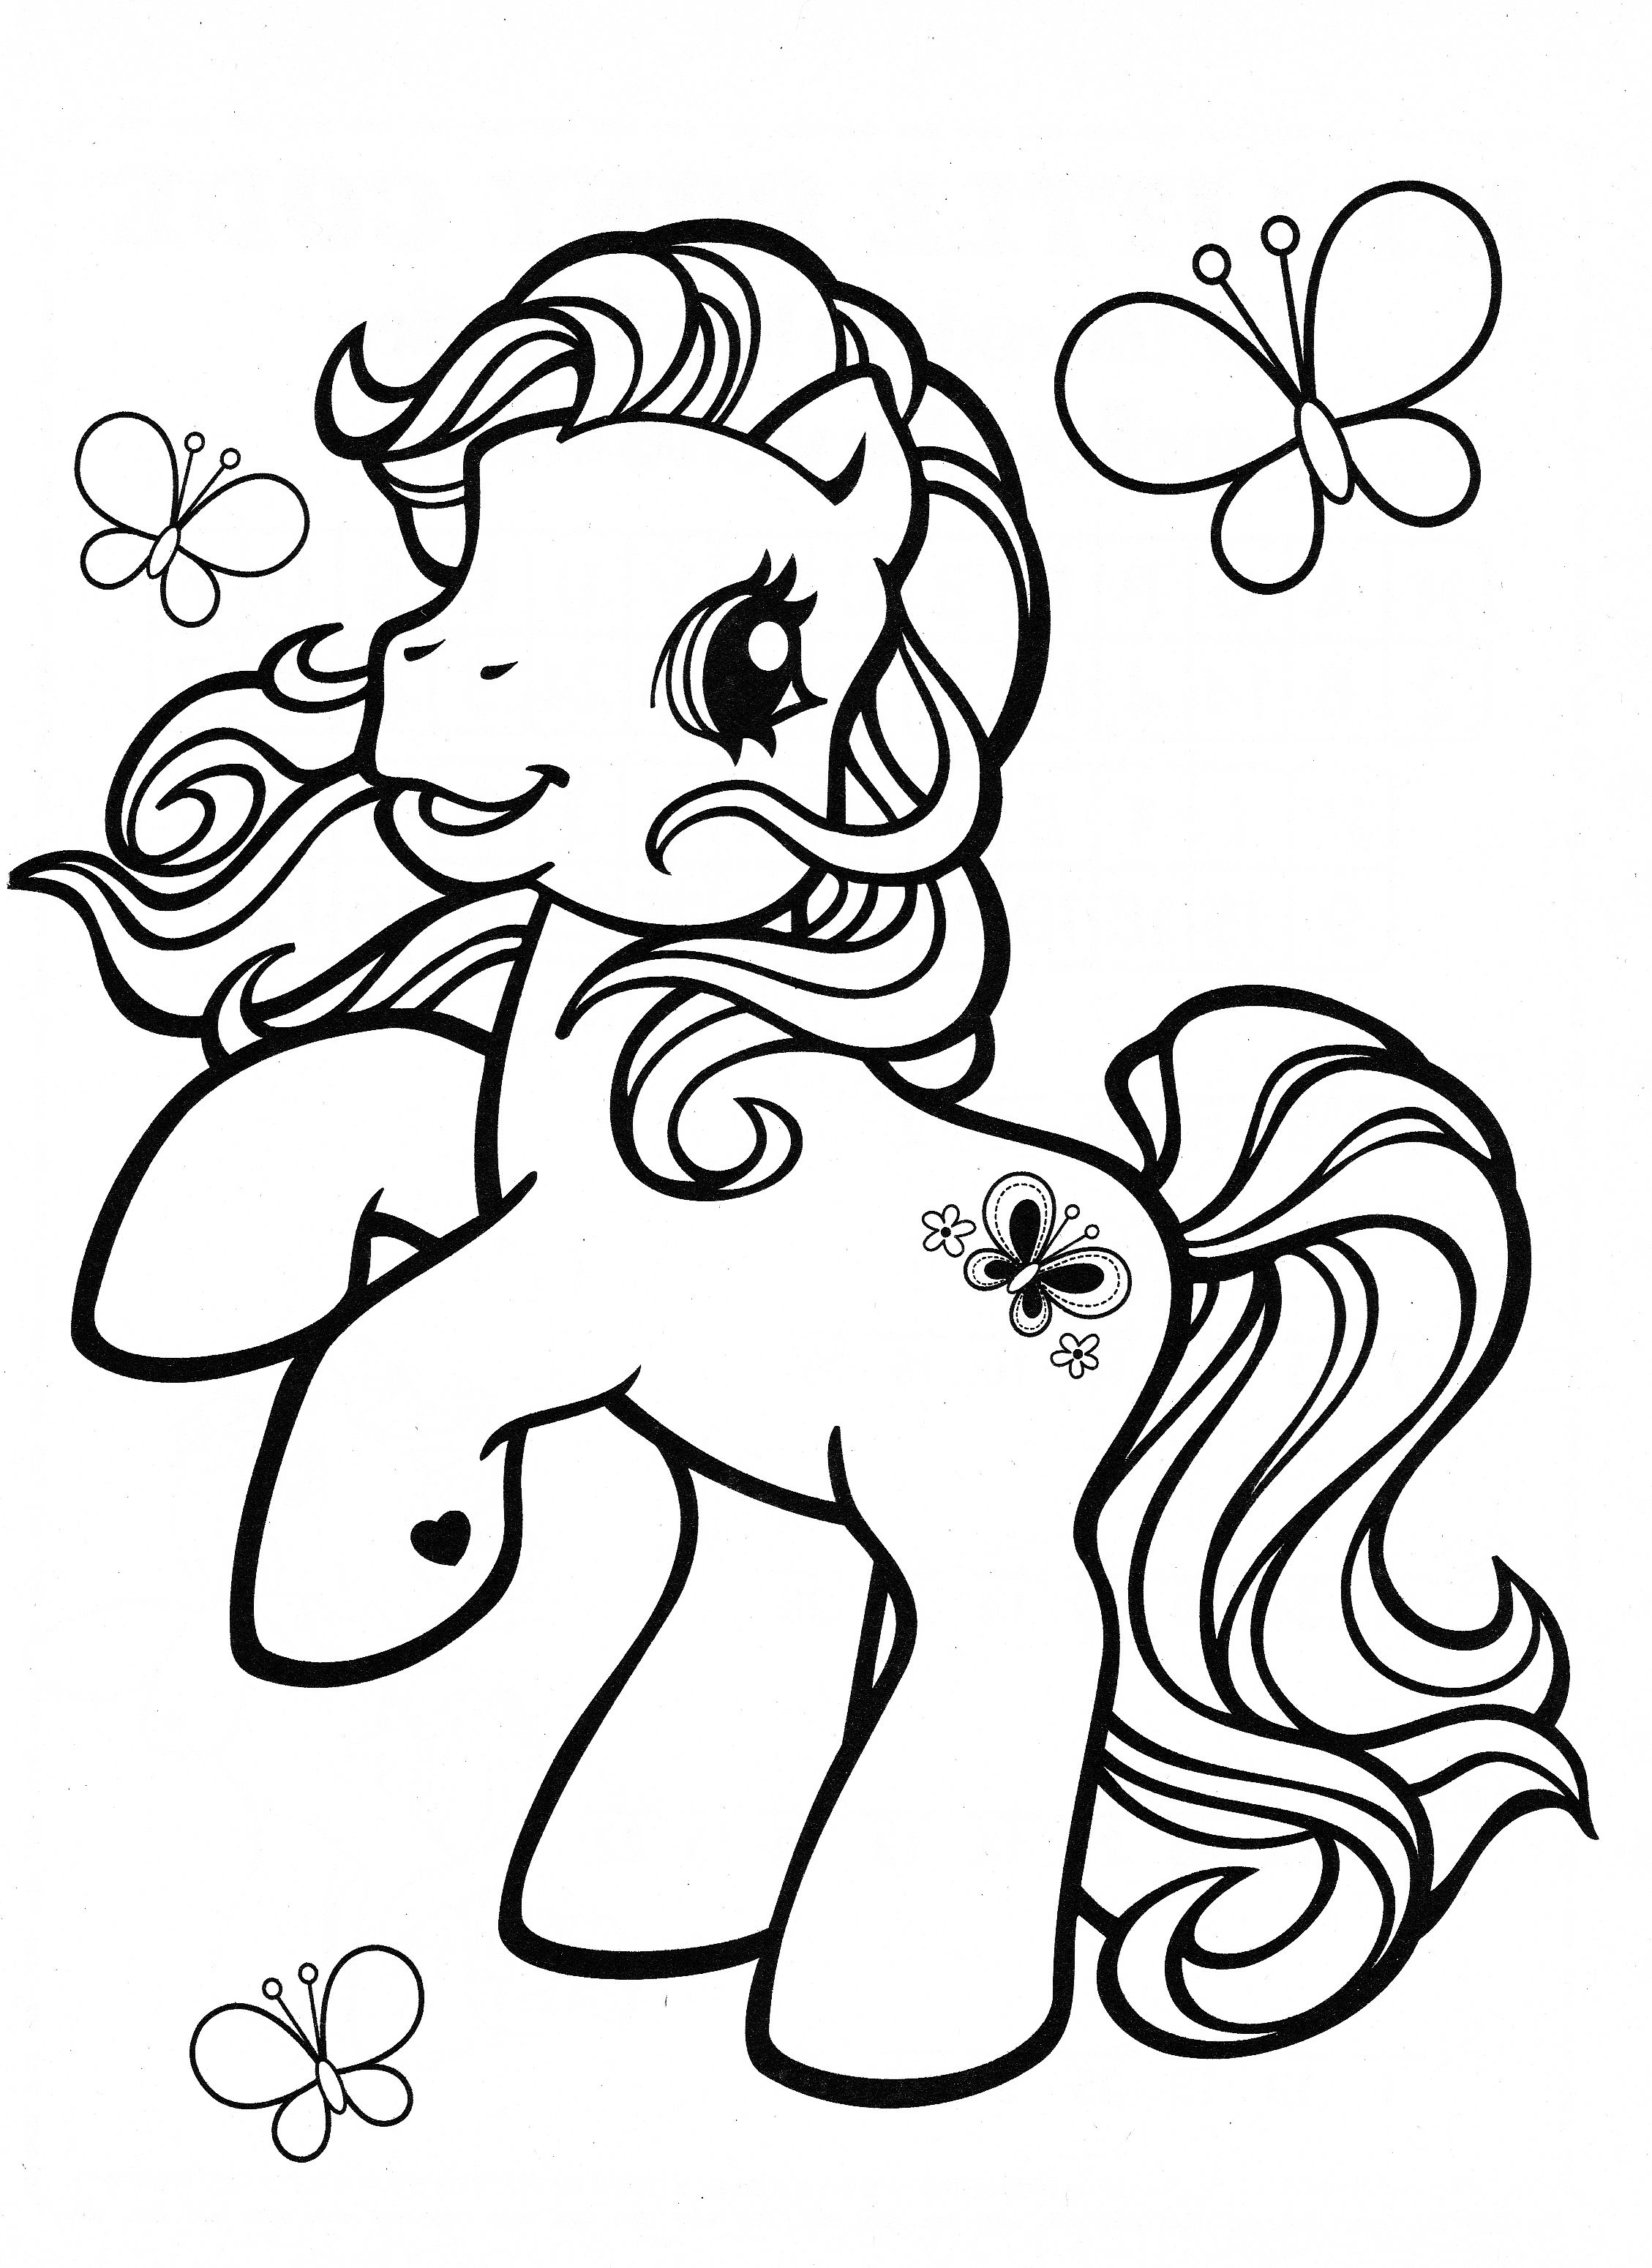 my little pony colouring pages to print fun learn free worksheets for kid fluttershy my pages pony colouring to little my print 